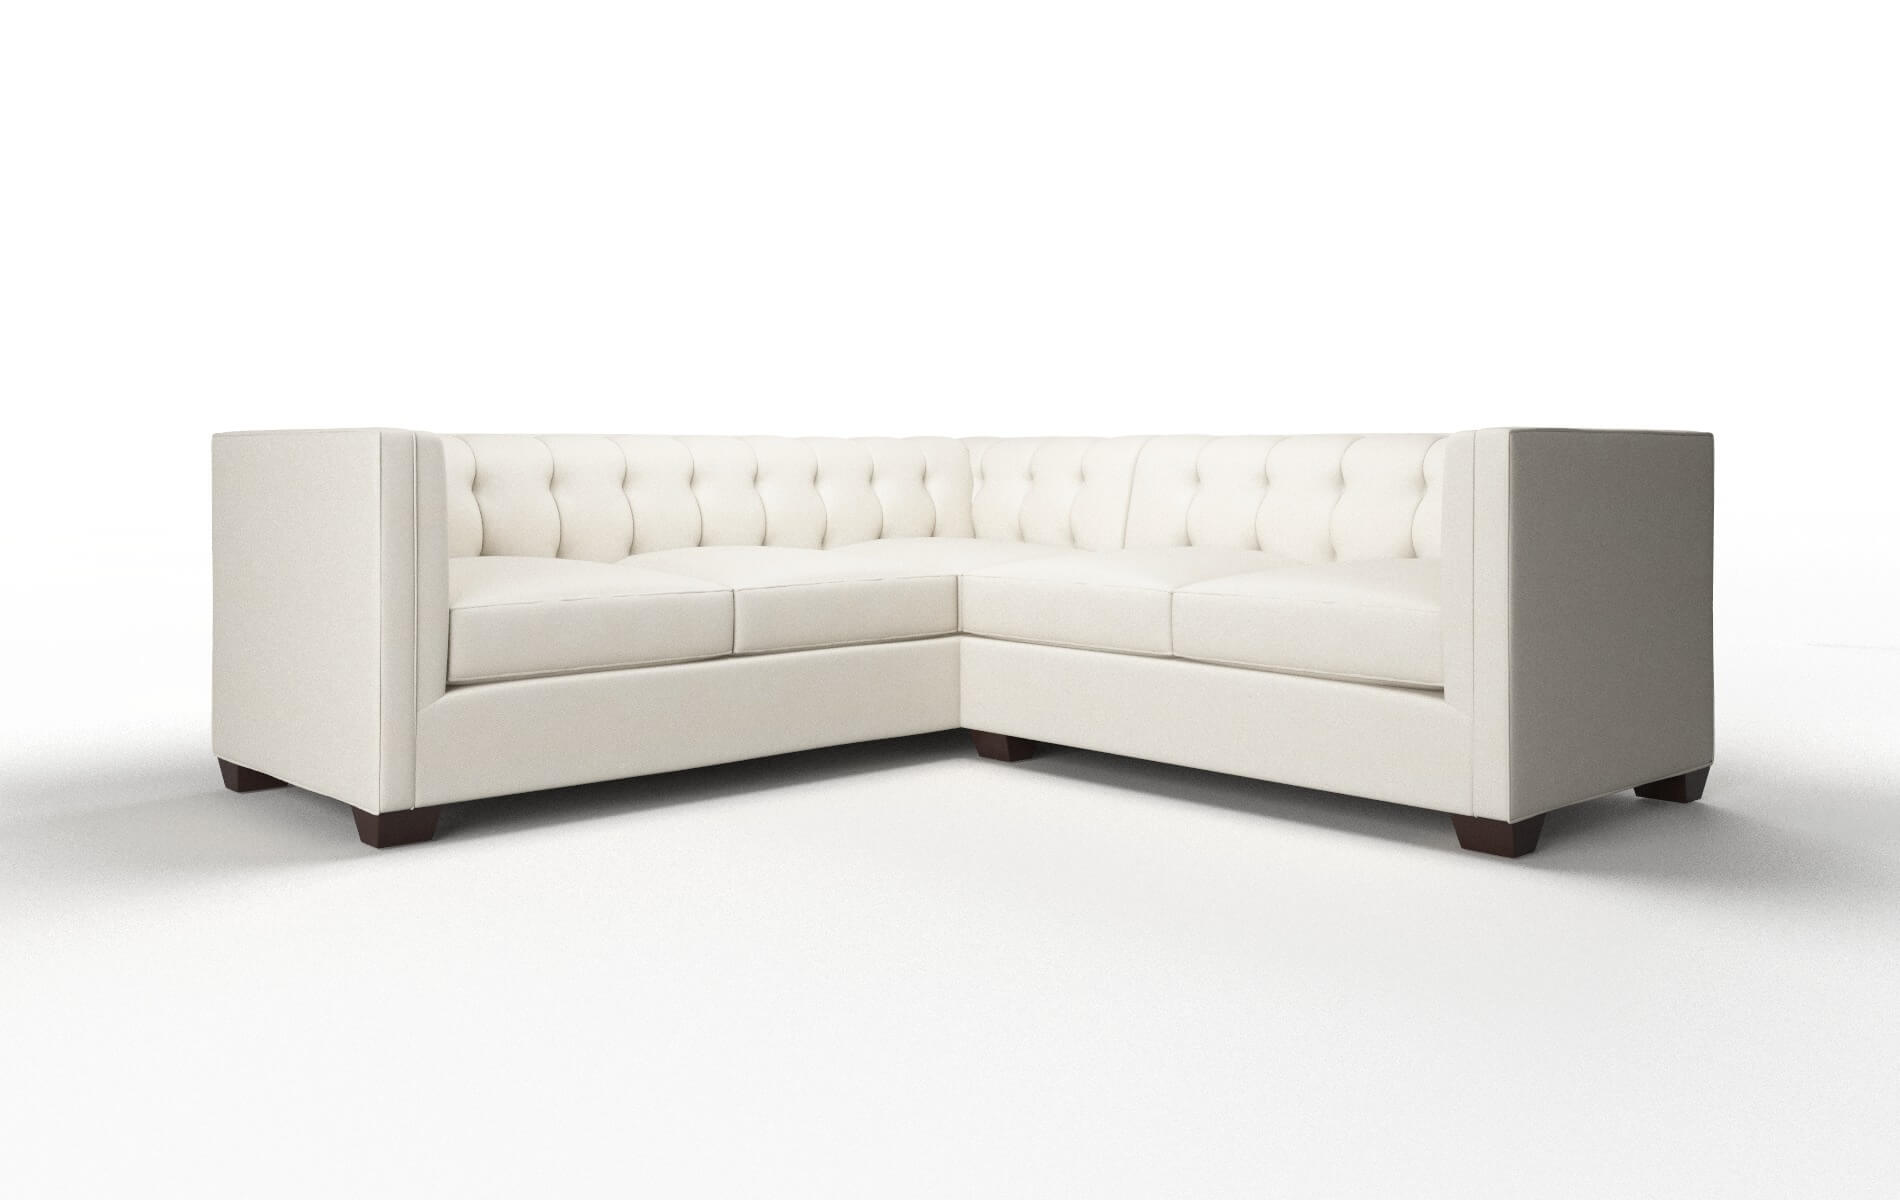 Grant Bungalow Ivory Sectional espresso legs